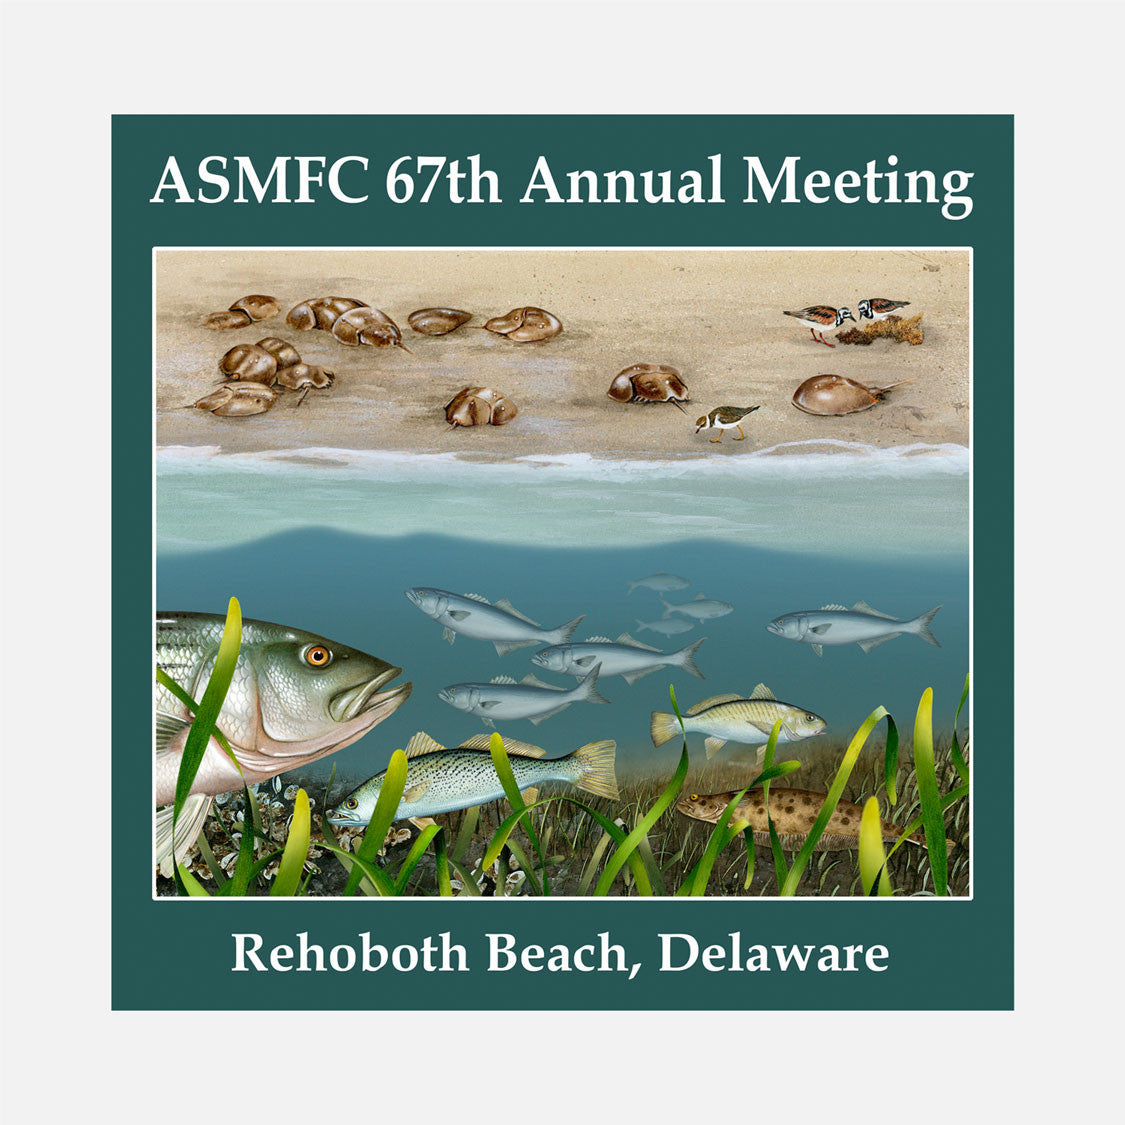 67th annual meeting of the Atlantic States Marine Fisheries Commission, Rehoboth Beach, Delaware, 2008. The logo is a split image of several Delaware marine species.